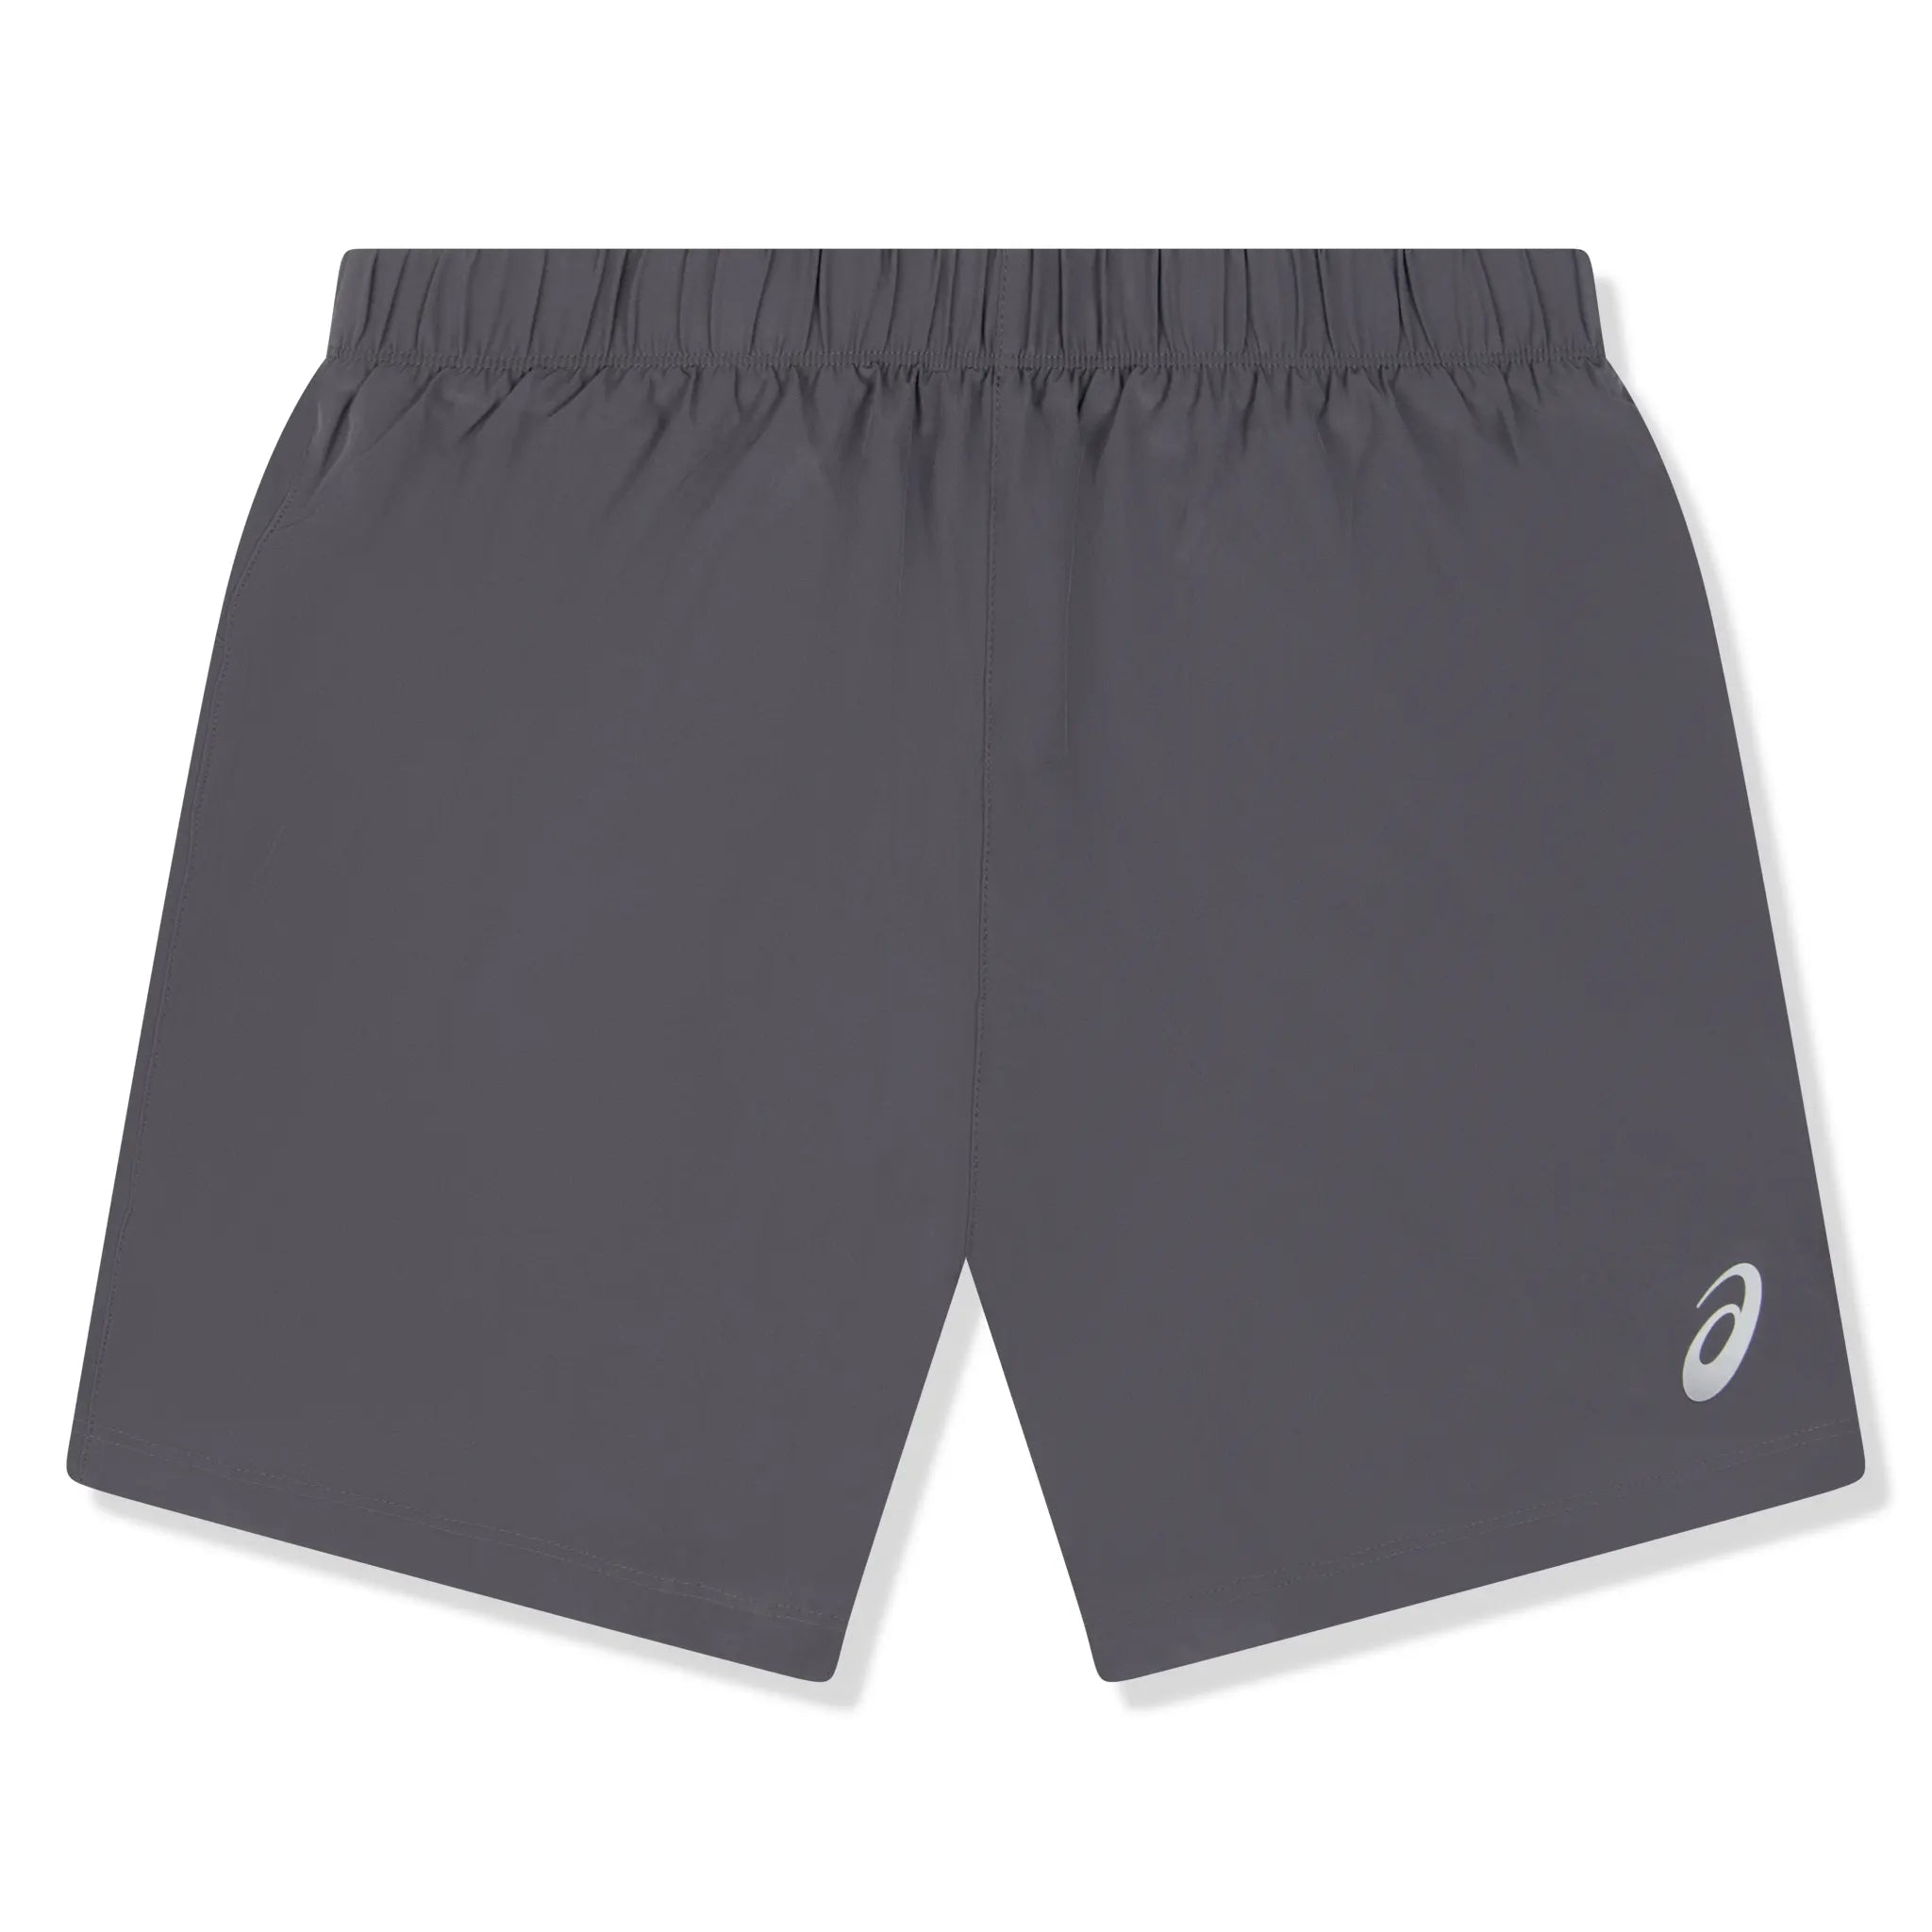 Front view of Asics Sport Woven 2 in 1 Dark Grey Running Shorts 164907-0779